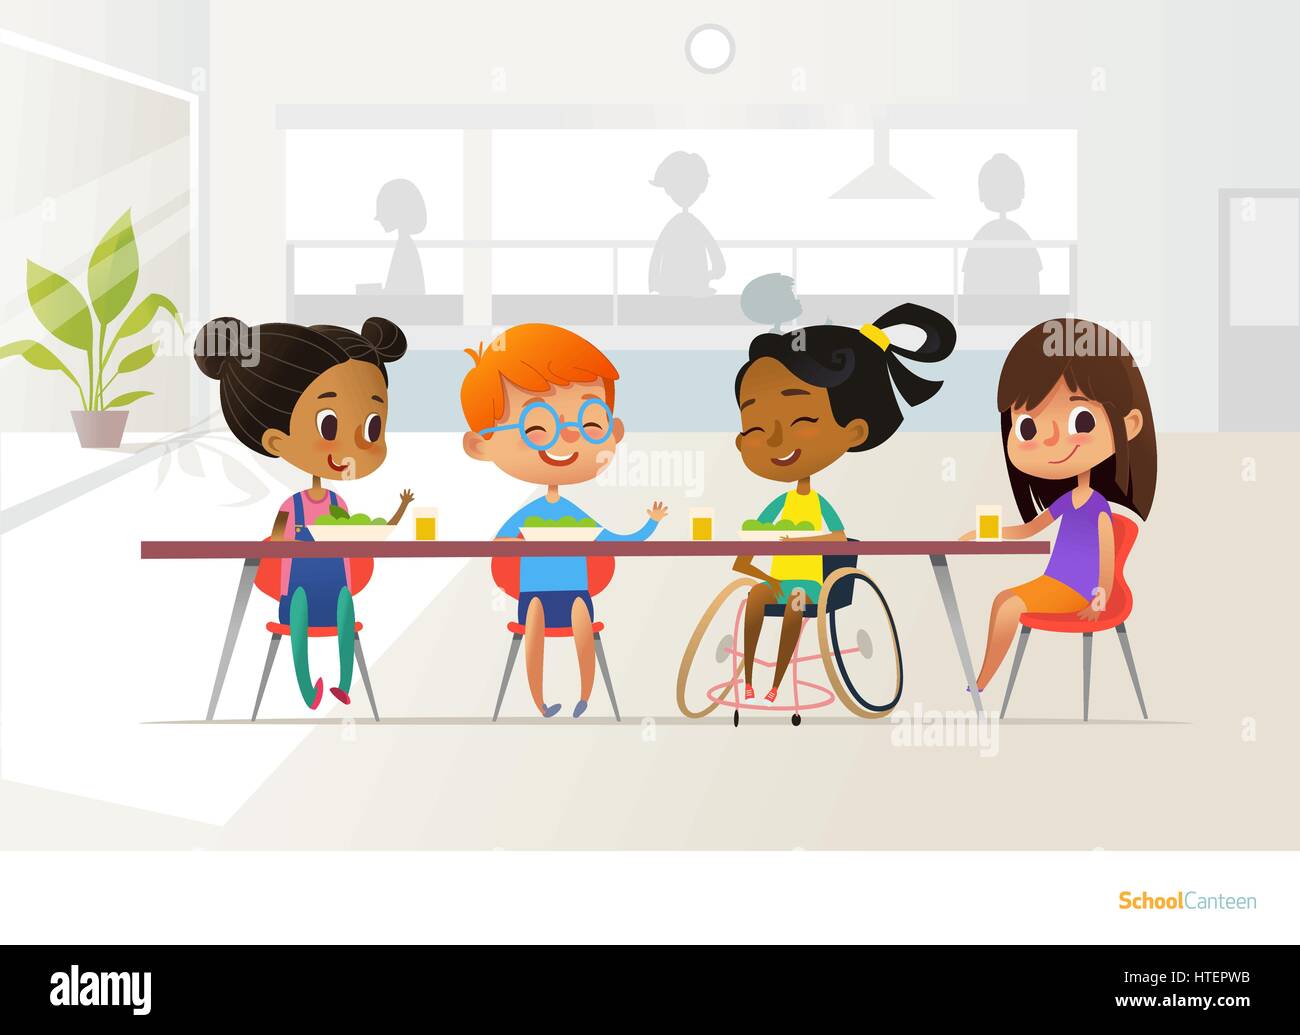 Smiling disabled girl sitting at table in school canteen and talking to her classmates. Children s friendship. Inclusive education concept. Vector illustration for banner, website, advertisement. Stock Vector